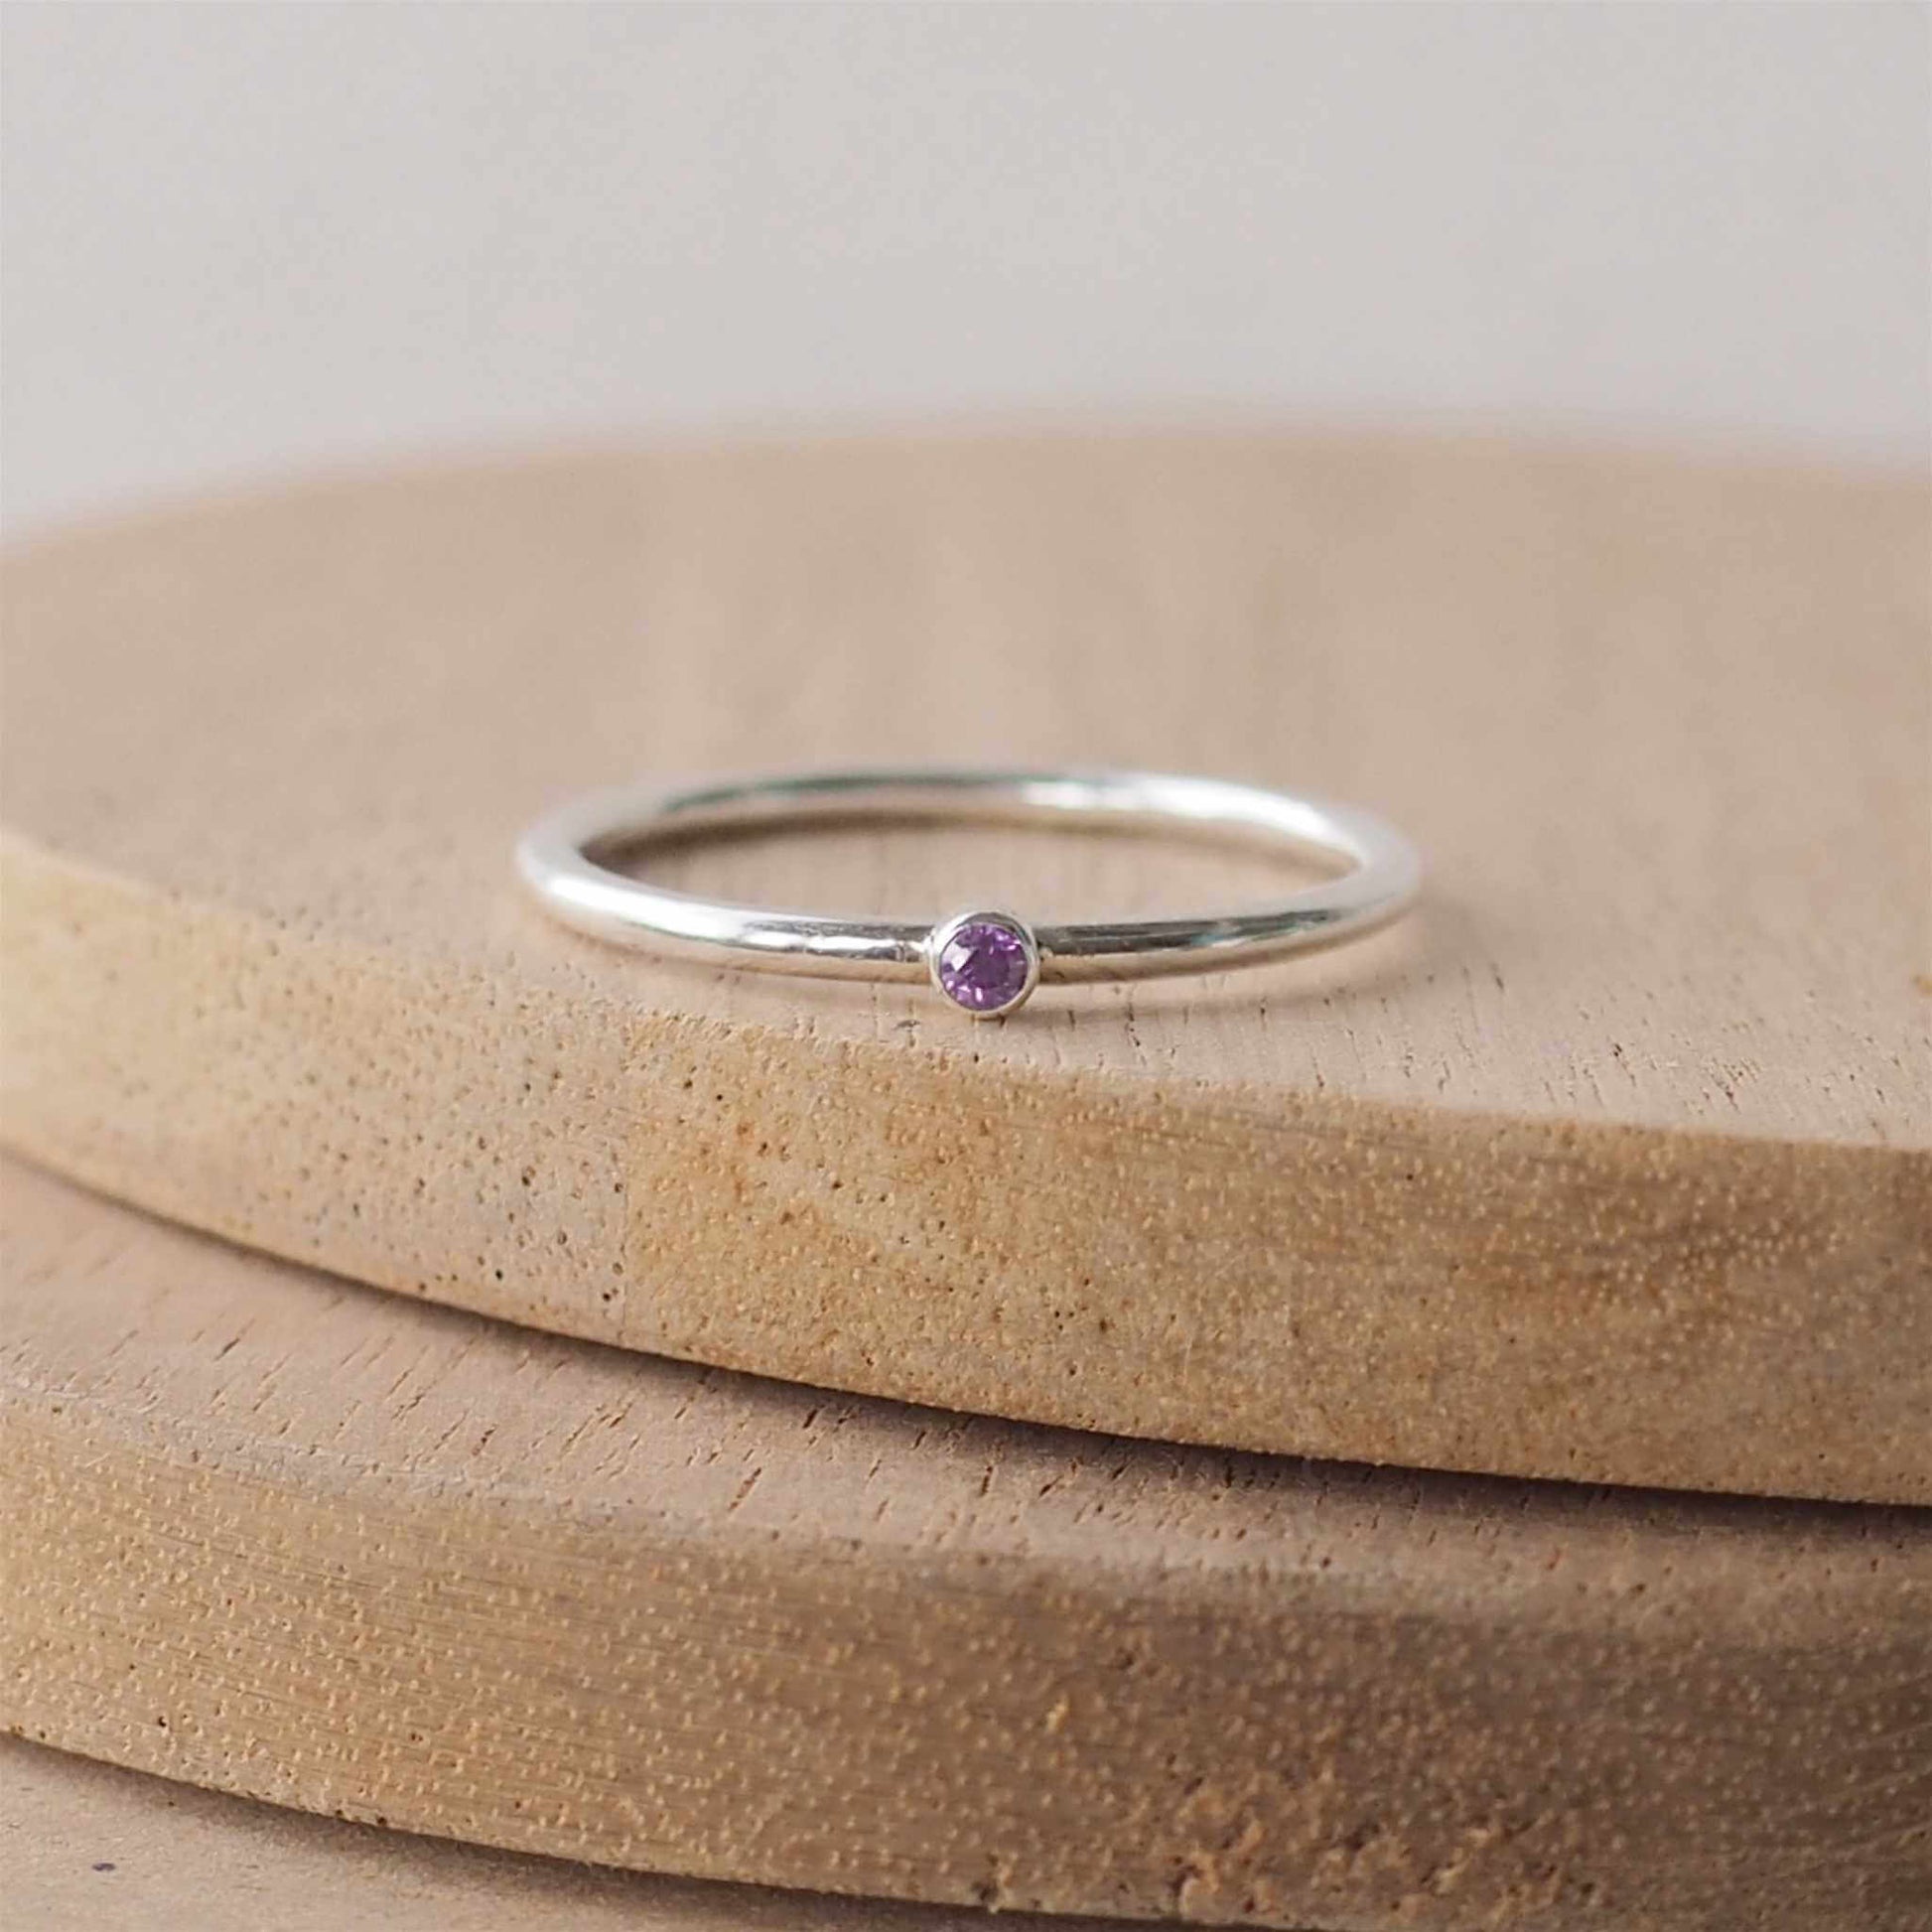 Silver ring with a purple gemstone. The ring is simple in style with no embellishment , with a round wire band 1.5mm thick with a simple purple 2mm round cubic zirconia stone set in an enclosed silver setting. Amethyst is birthstone for February. The ring is Sterling Silver and made to your ring size. Handmade in Scotland by Maram Jewellery